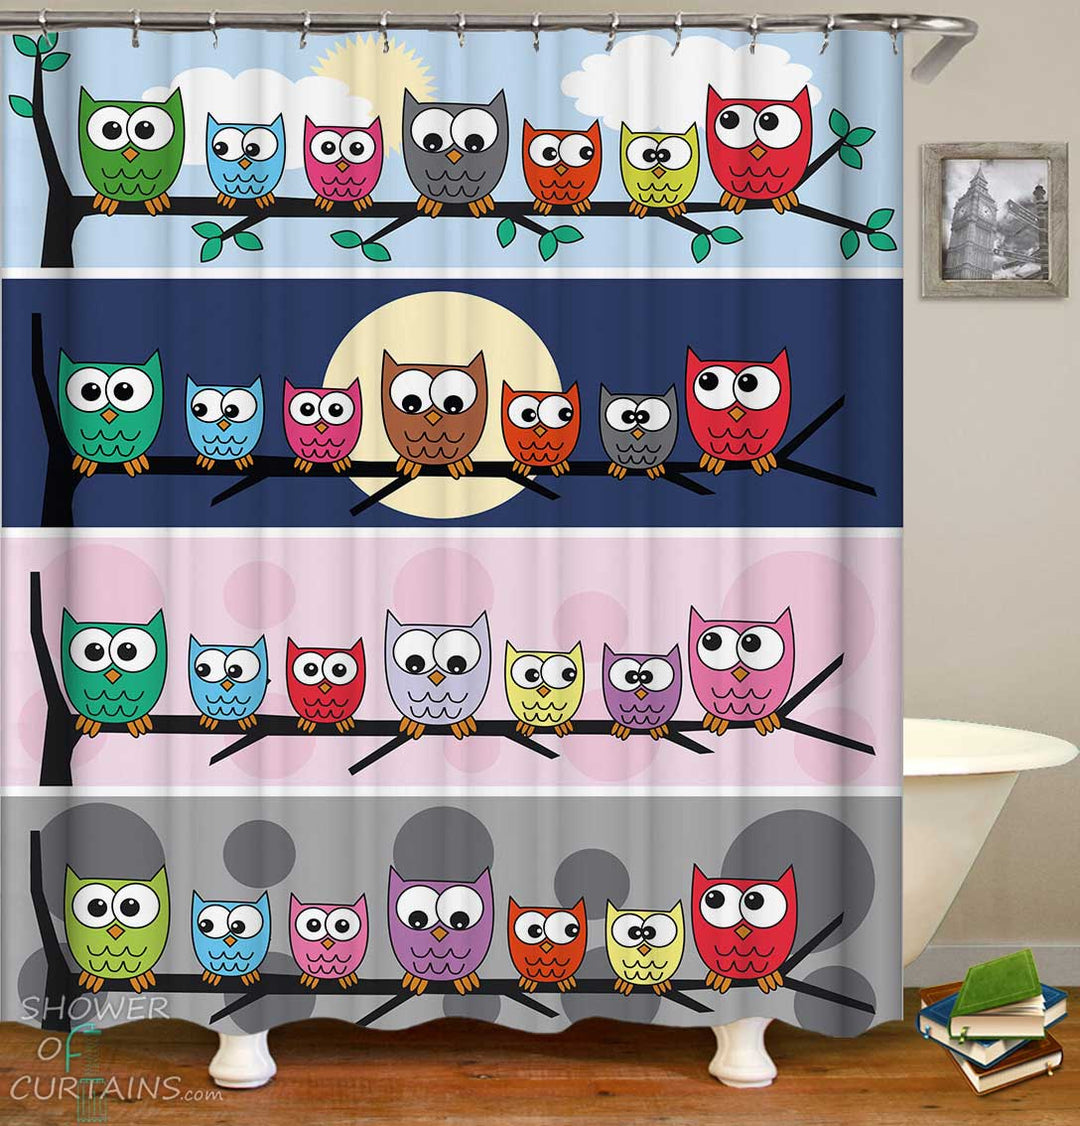 Shower Curtains with Cute Multi Colored Owls